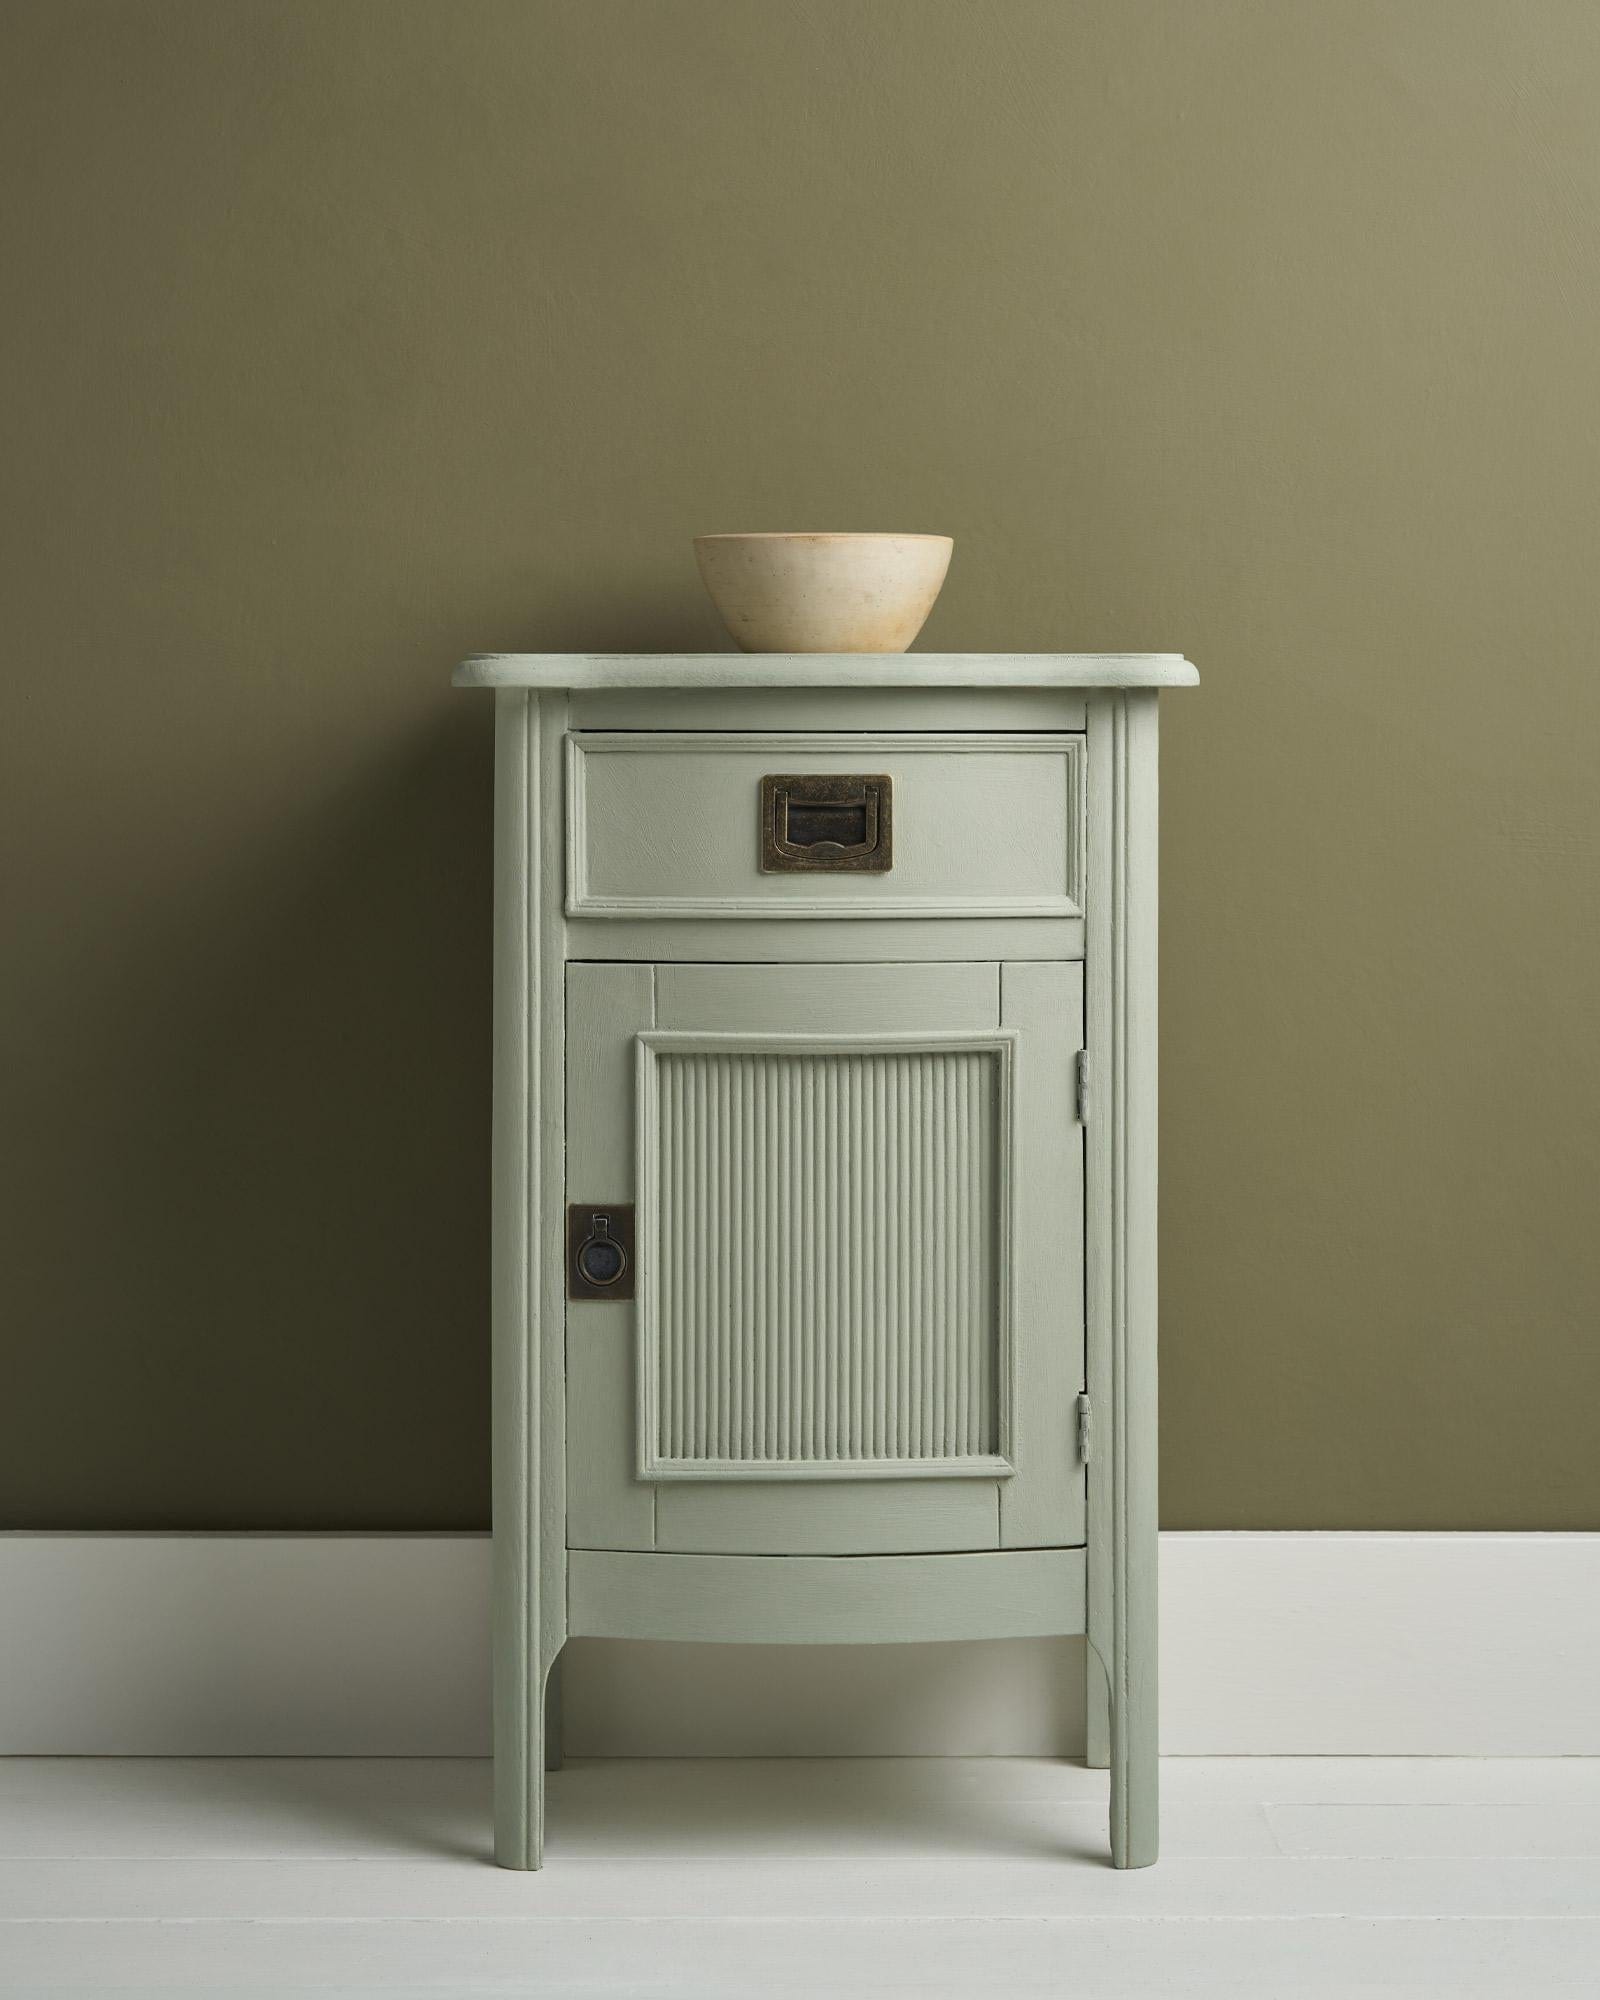 The Owl Box Paint Chalk Paint® by Annie Sloan Coolabah Green